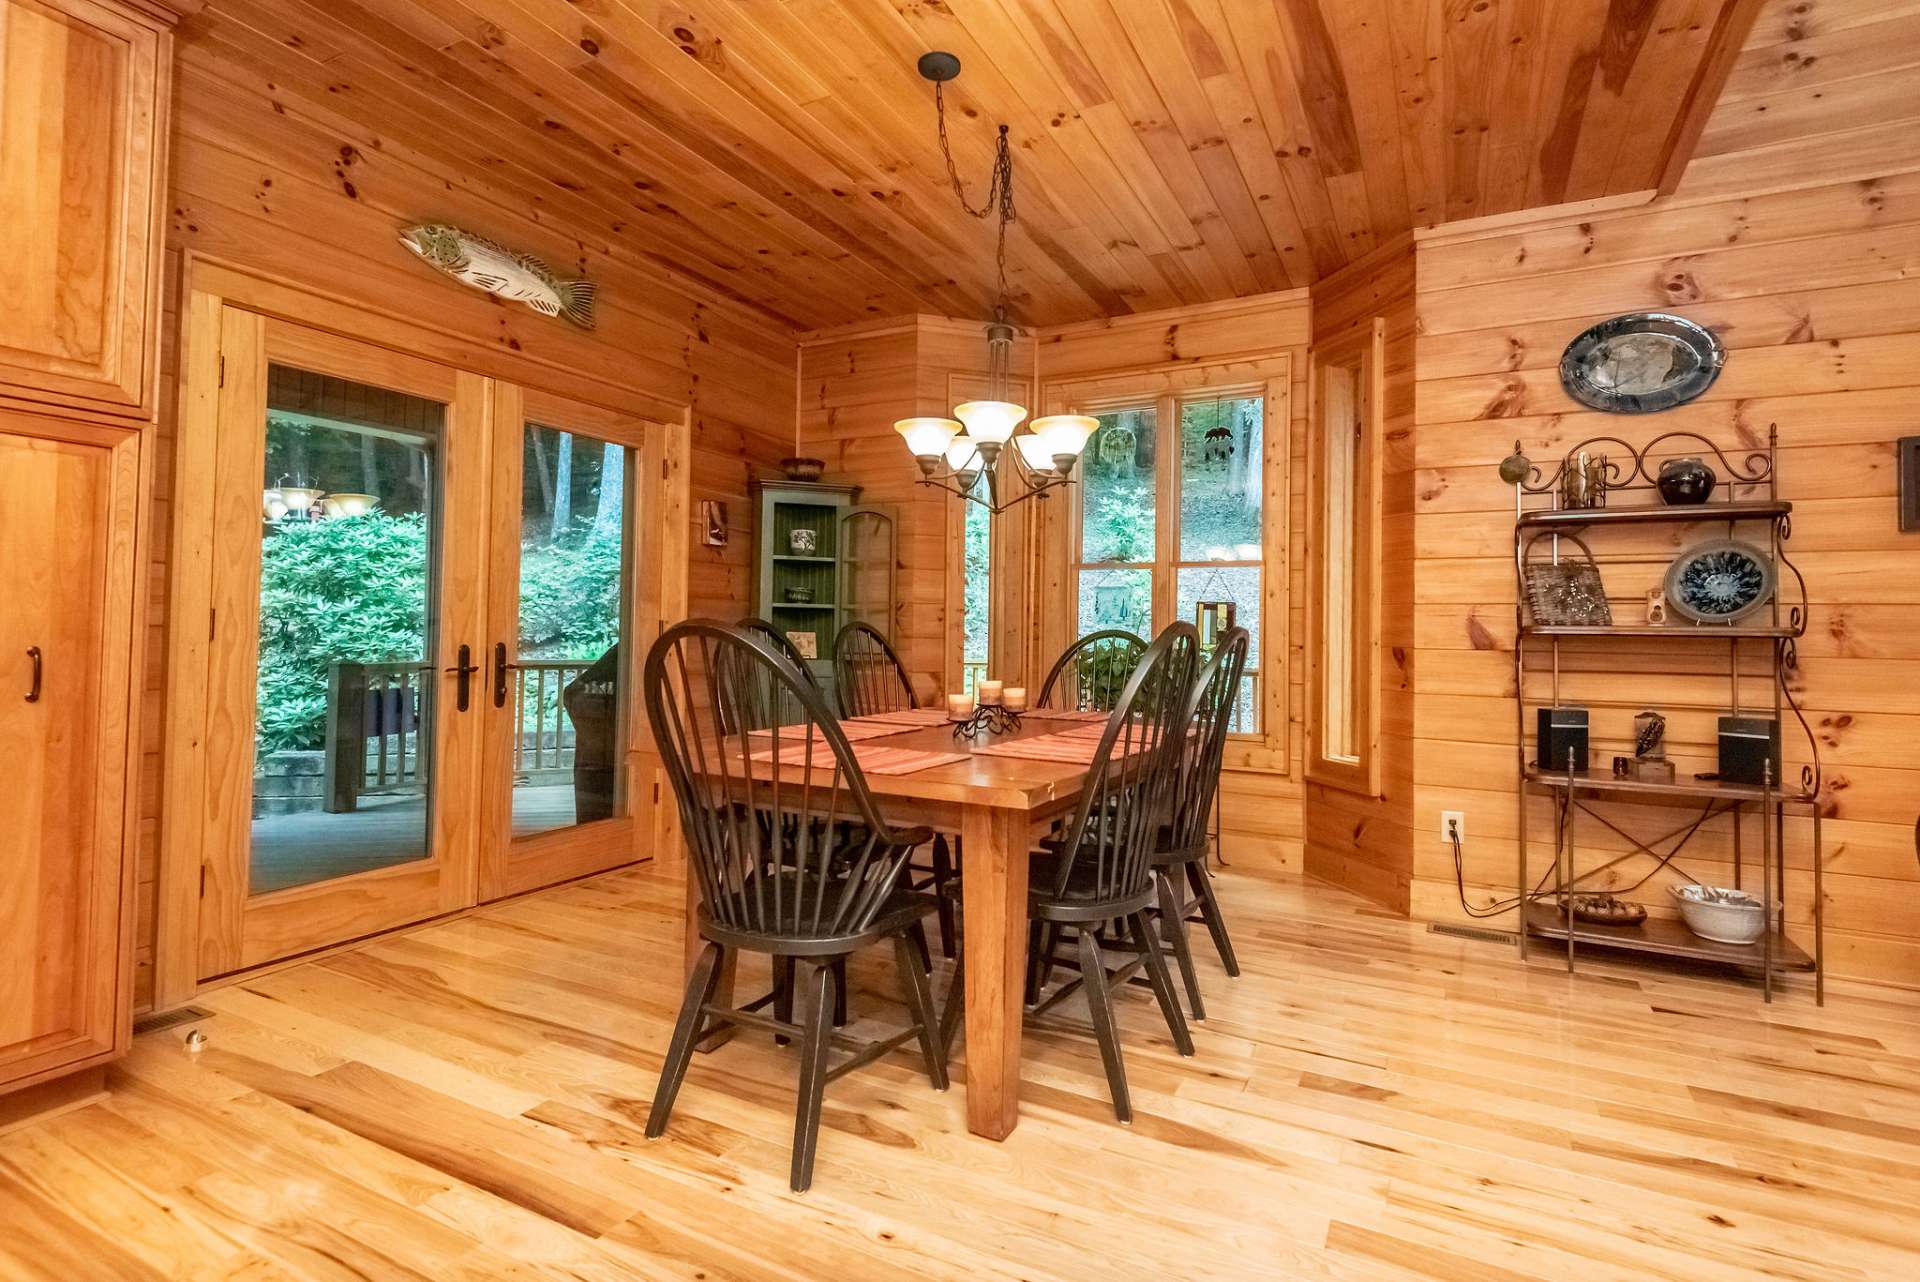 Dining area opens to the spacious covered back deck.